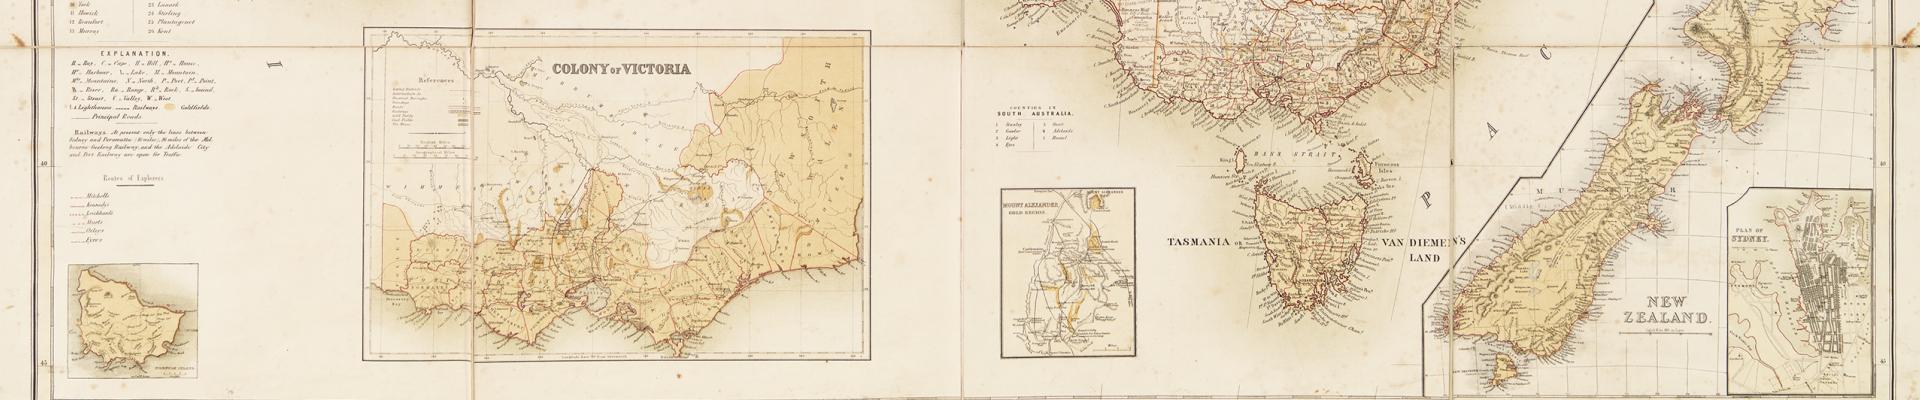 Map of Australia and Tasmania or Van Diemens Land showing the British colonies as divided into counties 1857